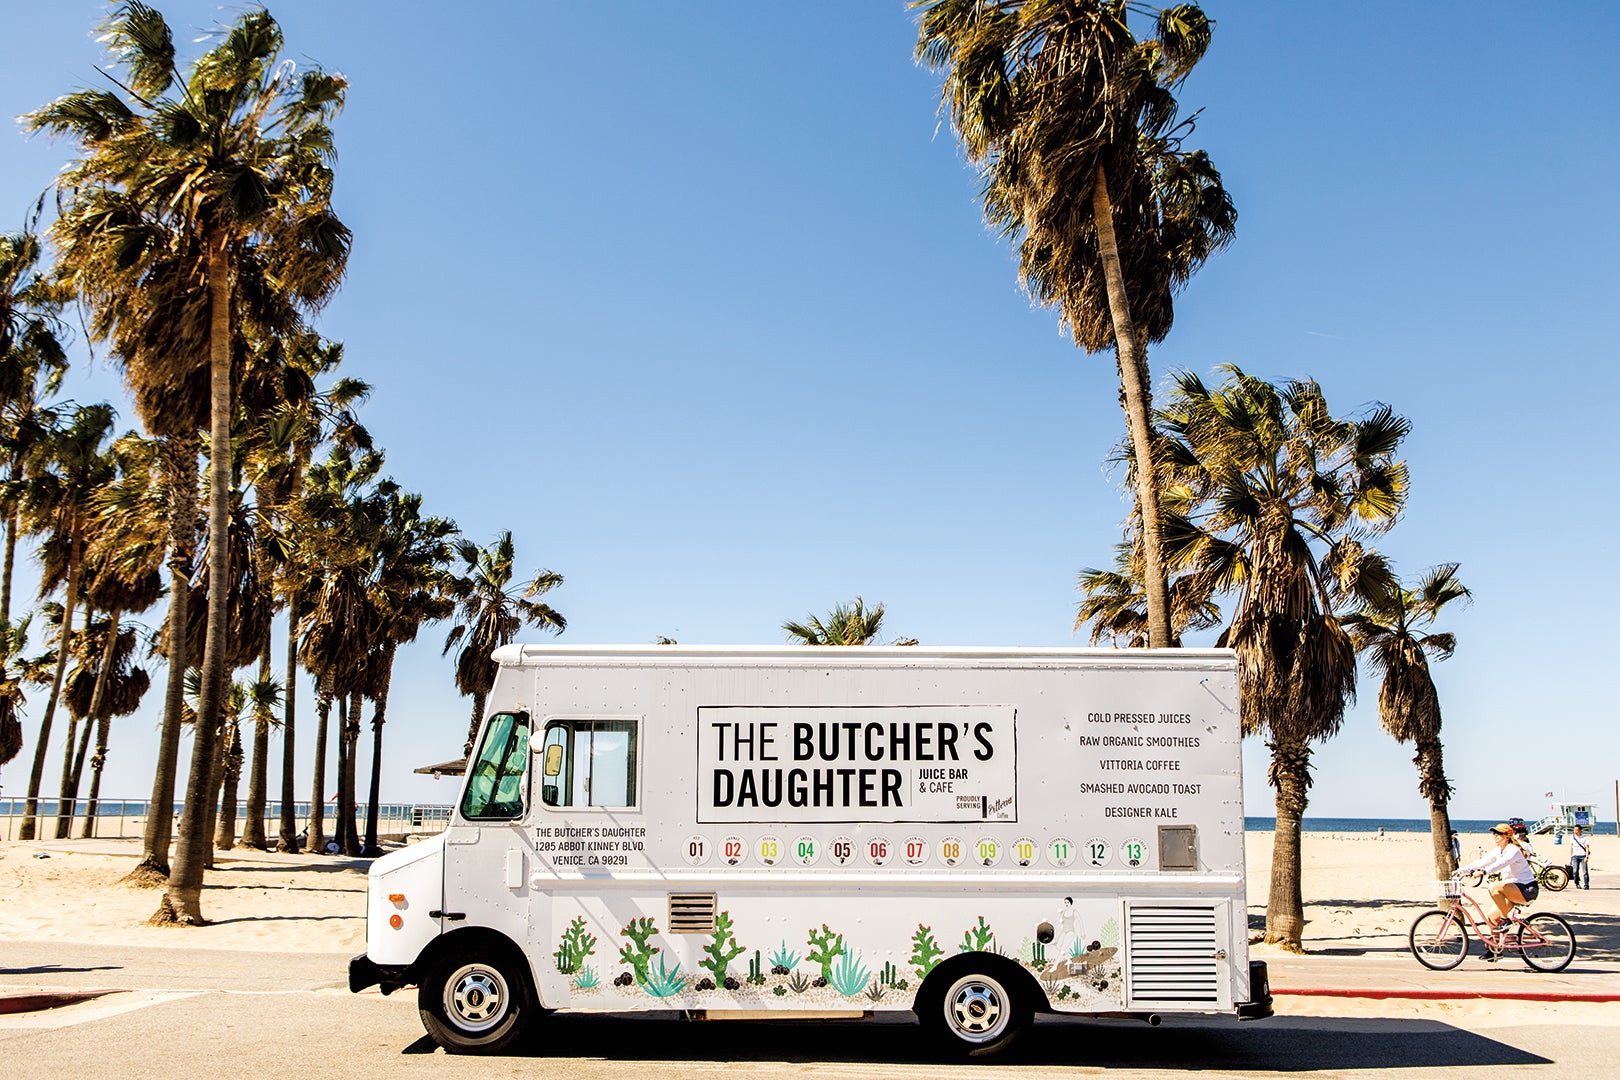 The Butcher's Daughter truck